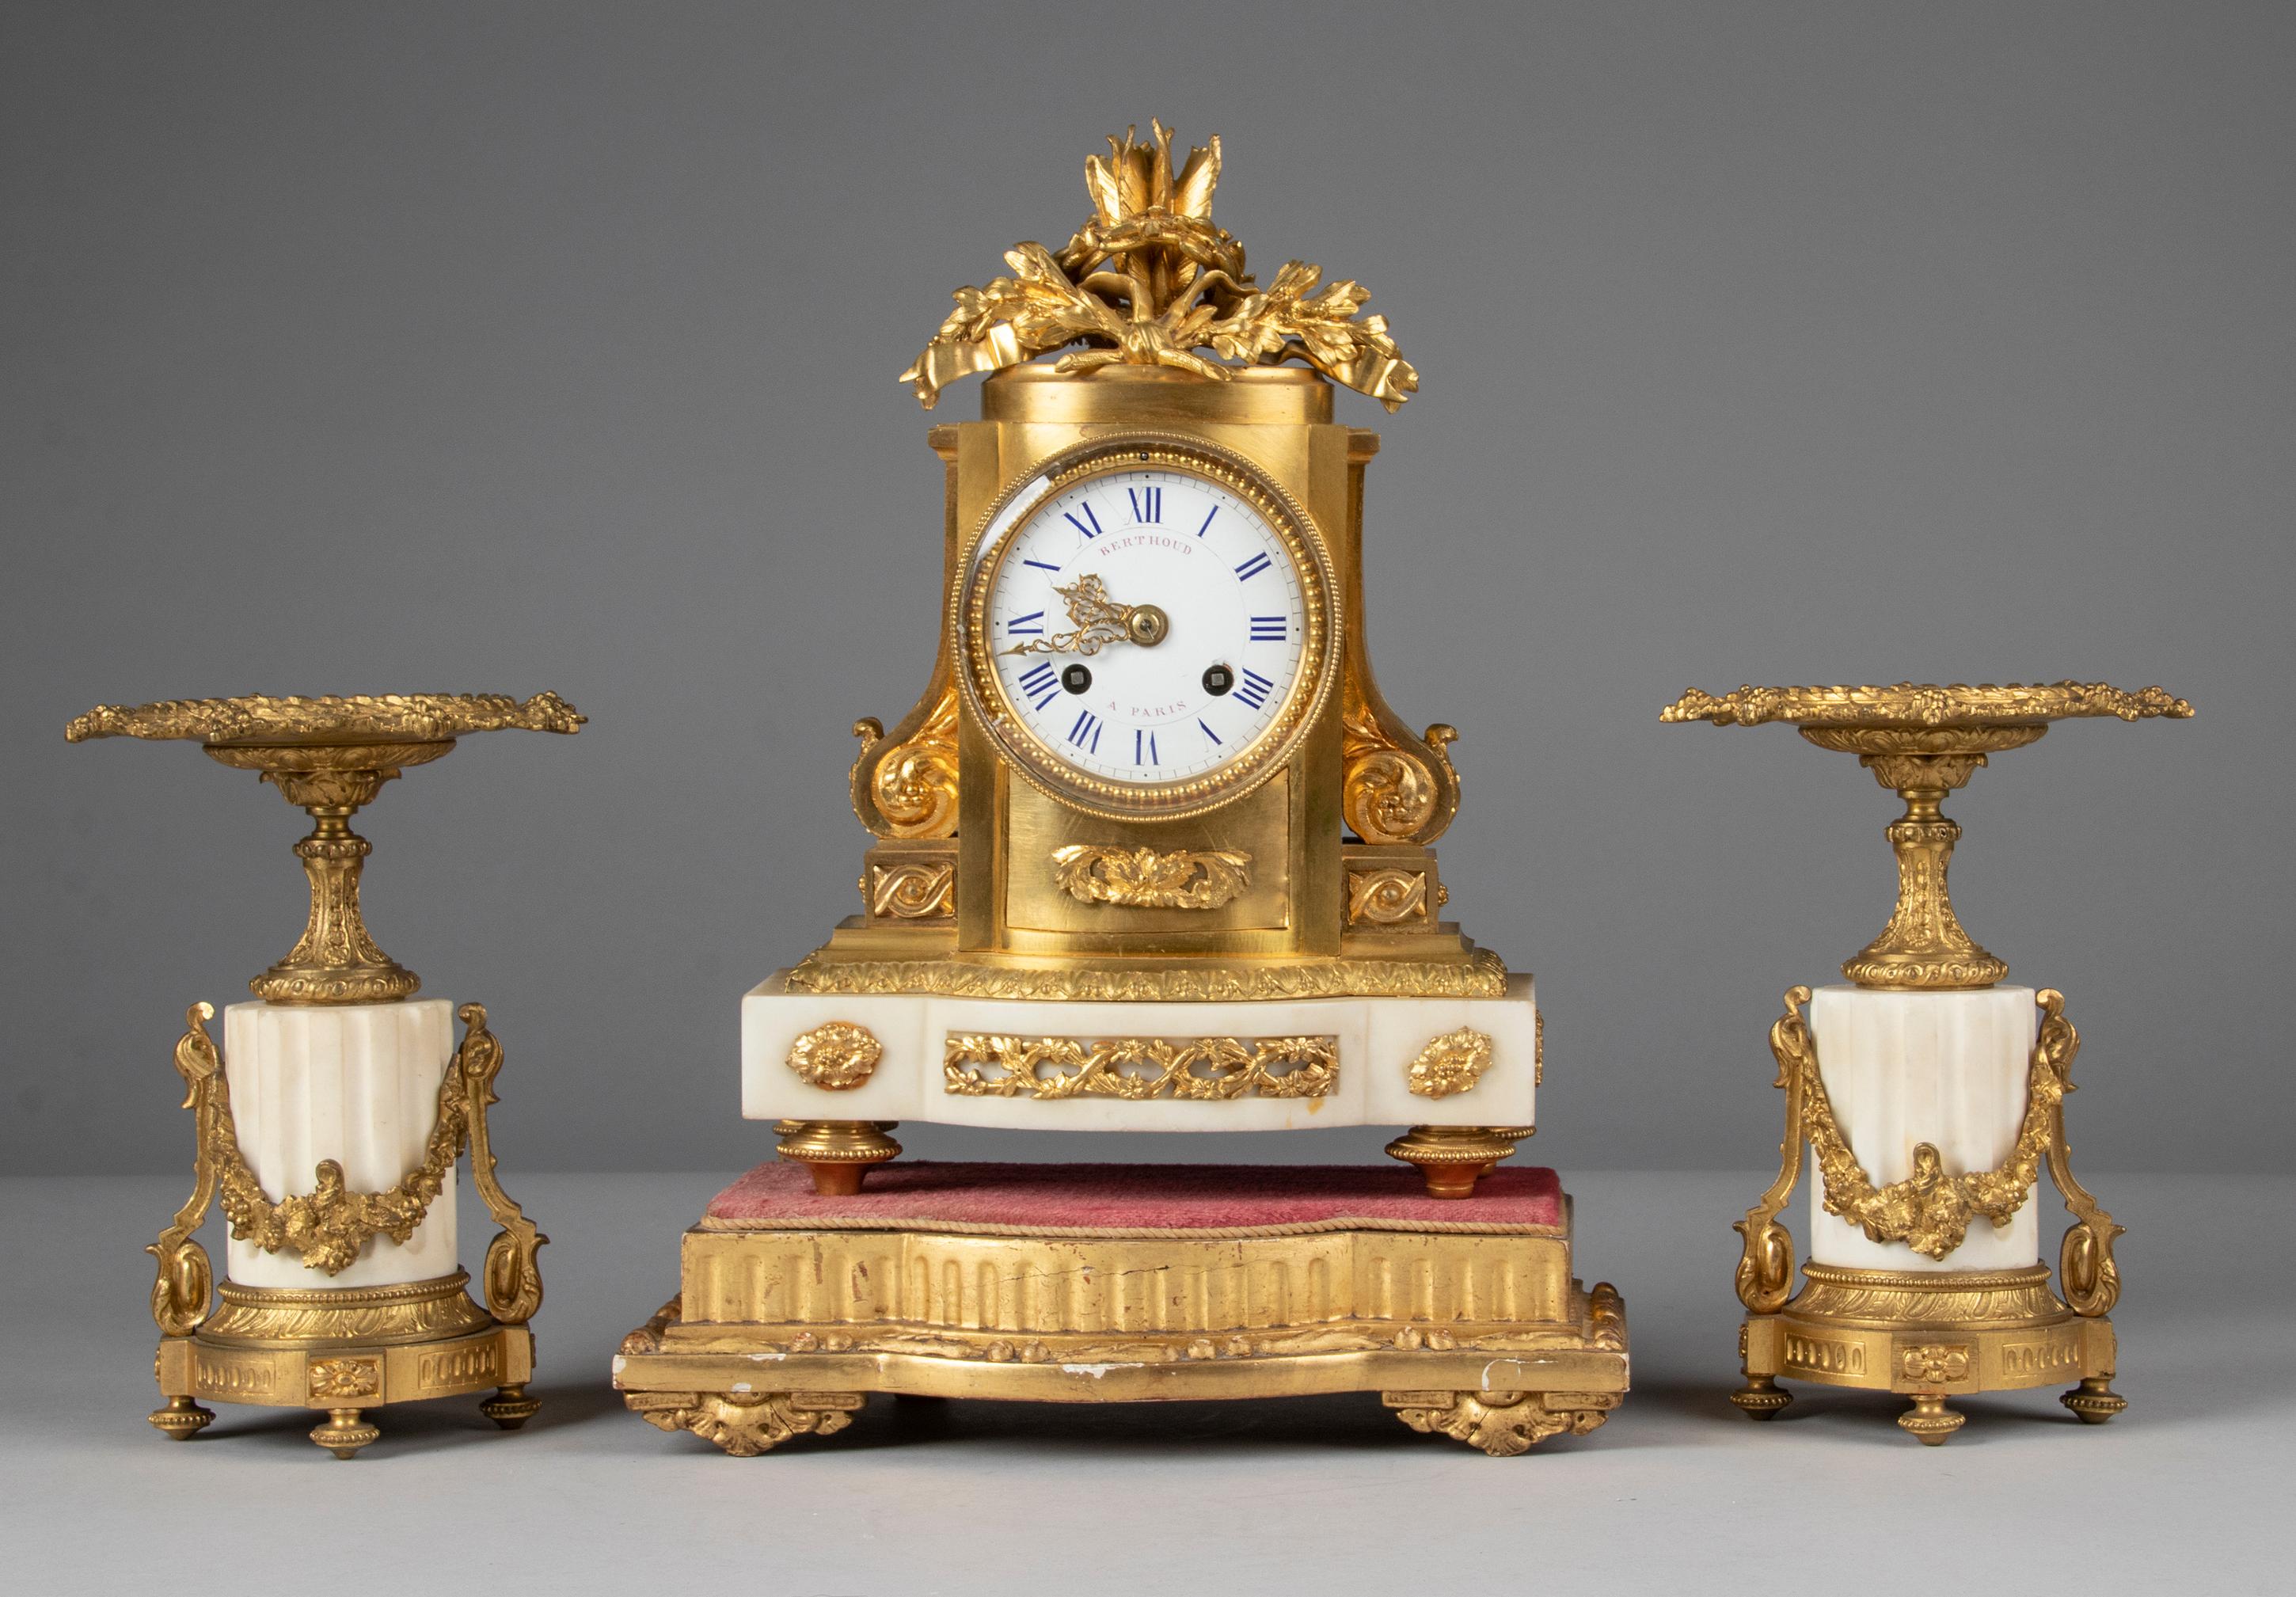 A refined Louis XVI style mantel clock with matching candelabras. The case is made of gilt brass and bronze ormolu casted ornaments, the dial is enameled iron. Resting on a white marble base. Richly embellished with neoclassical ornaments, flower